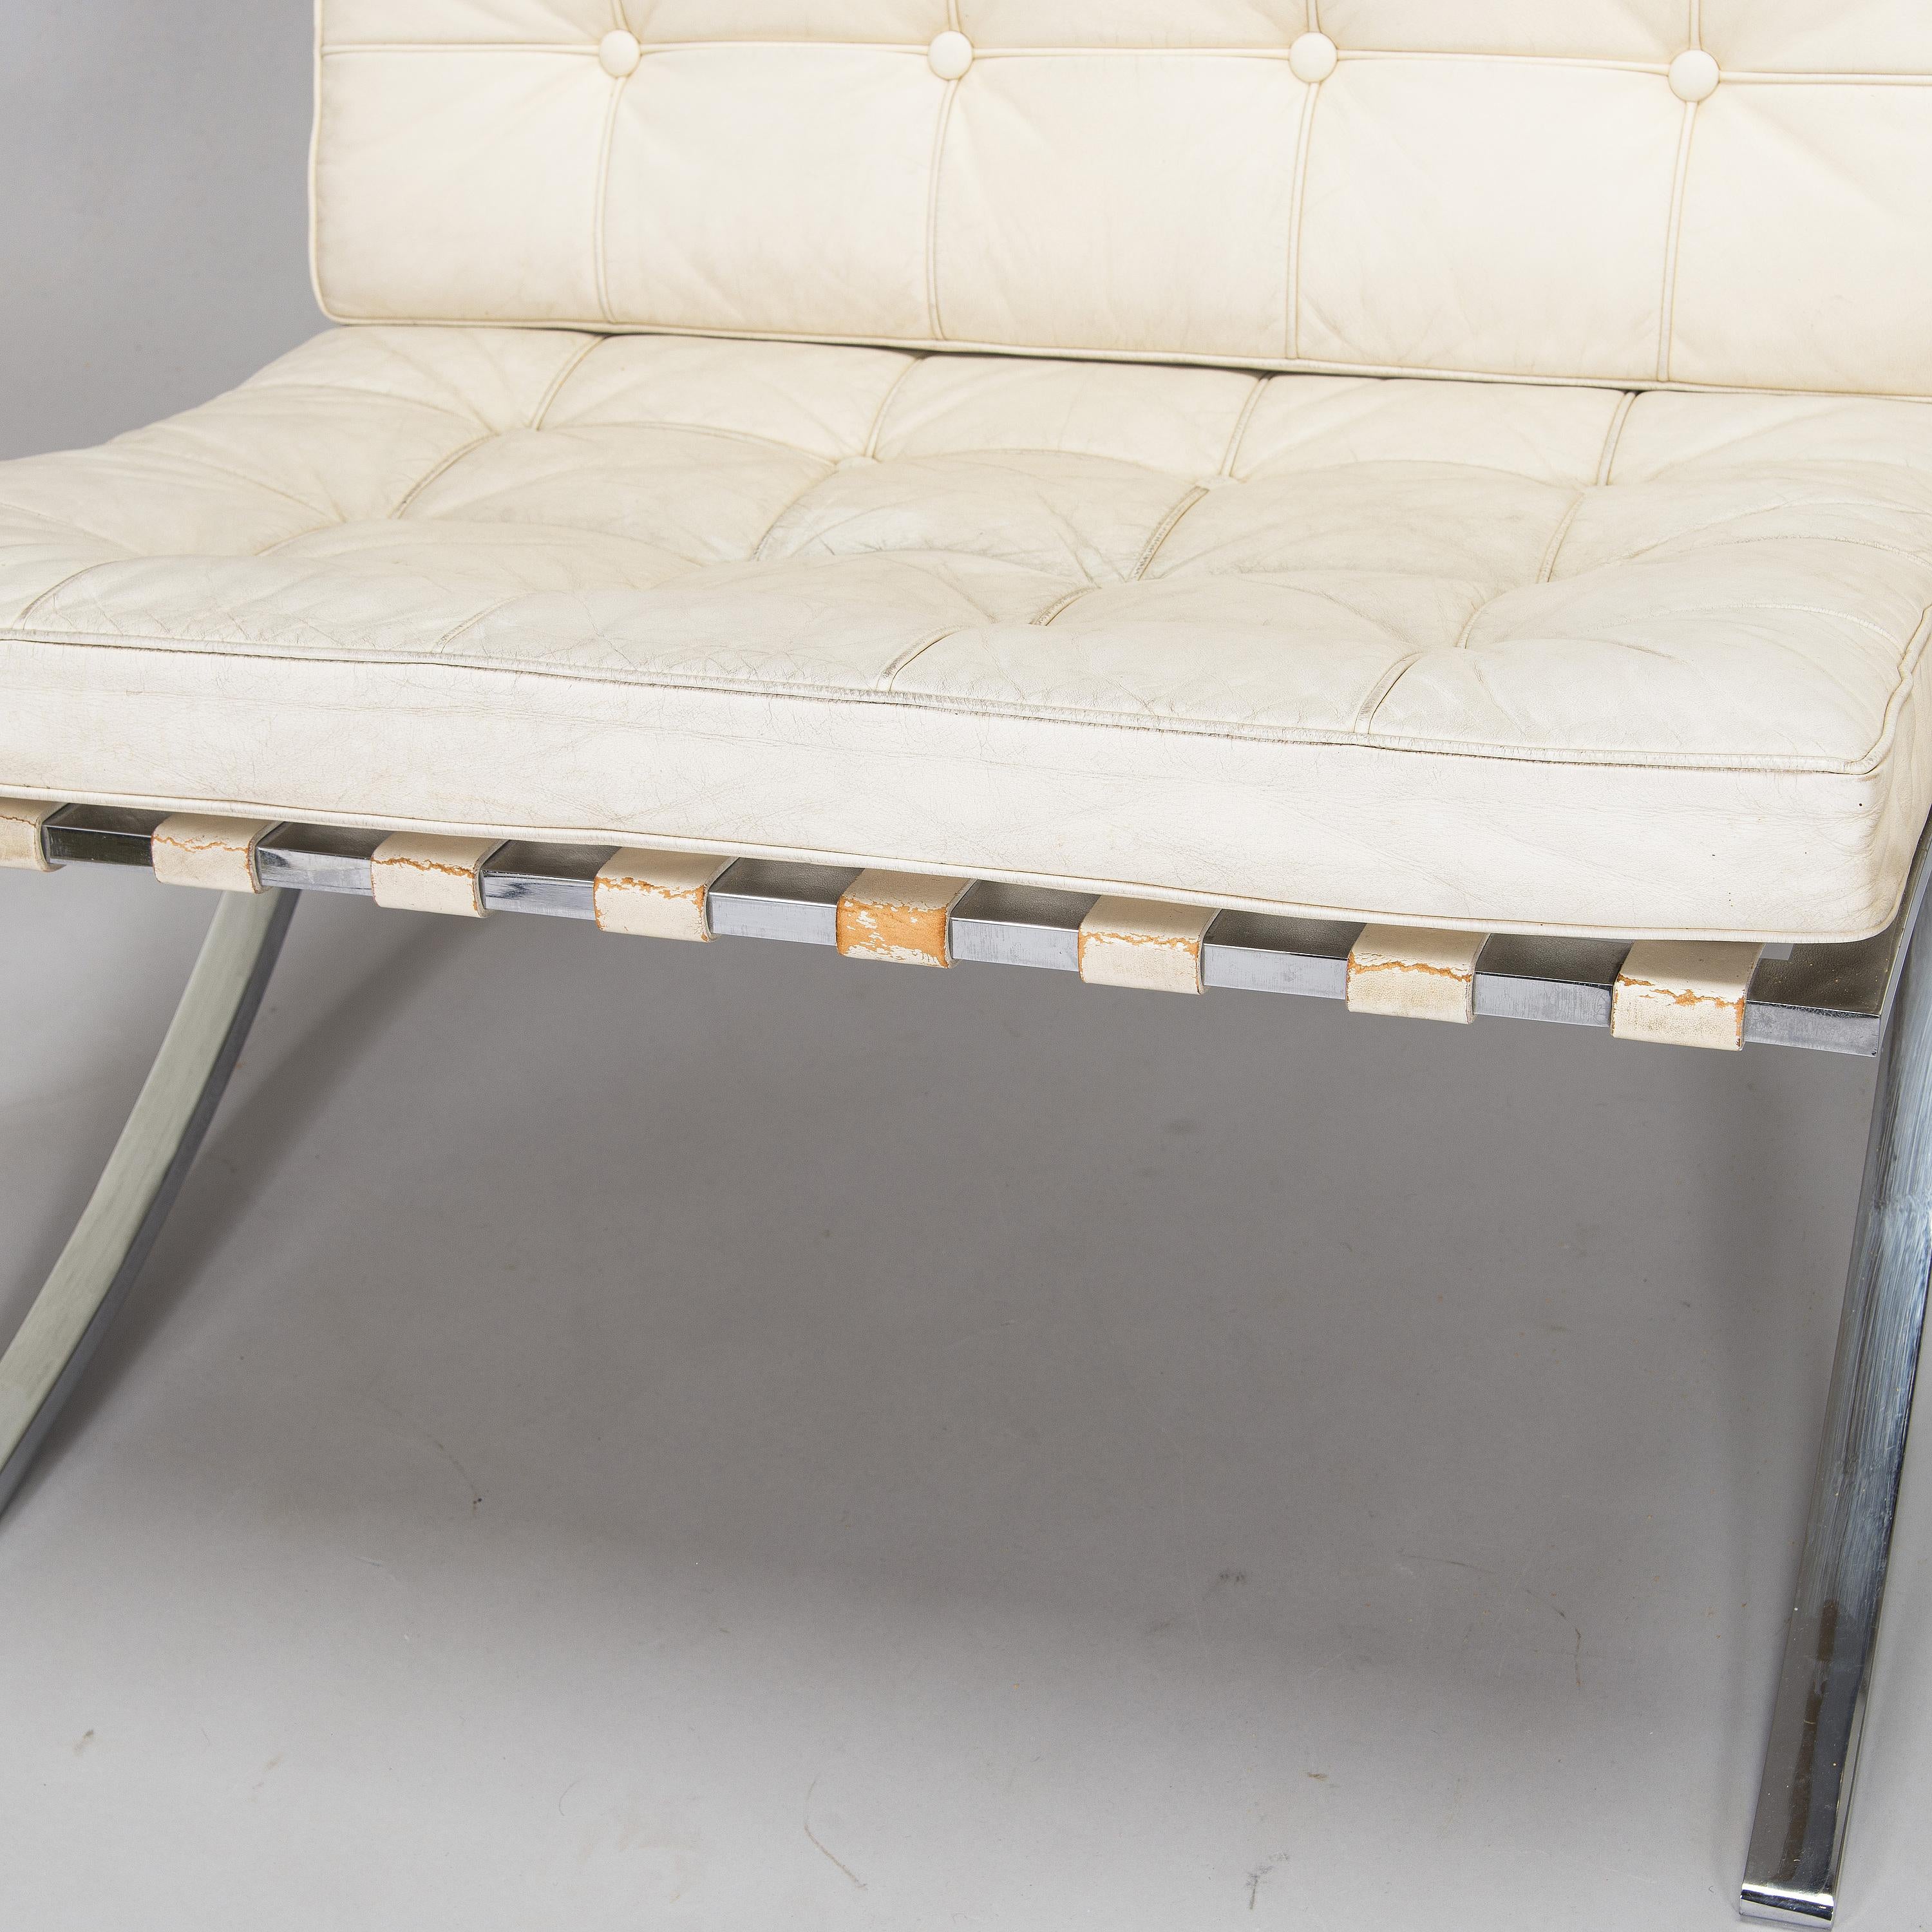 American Ludwig Mies van der Rohe 'Barcelona' chair for Knoll made in USA 1965 For Sale